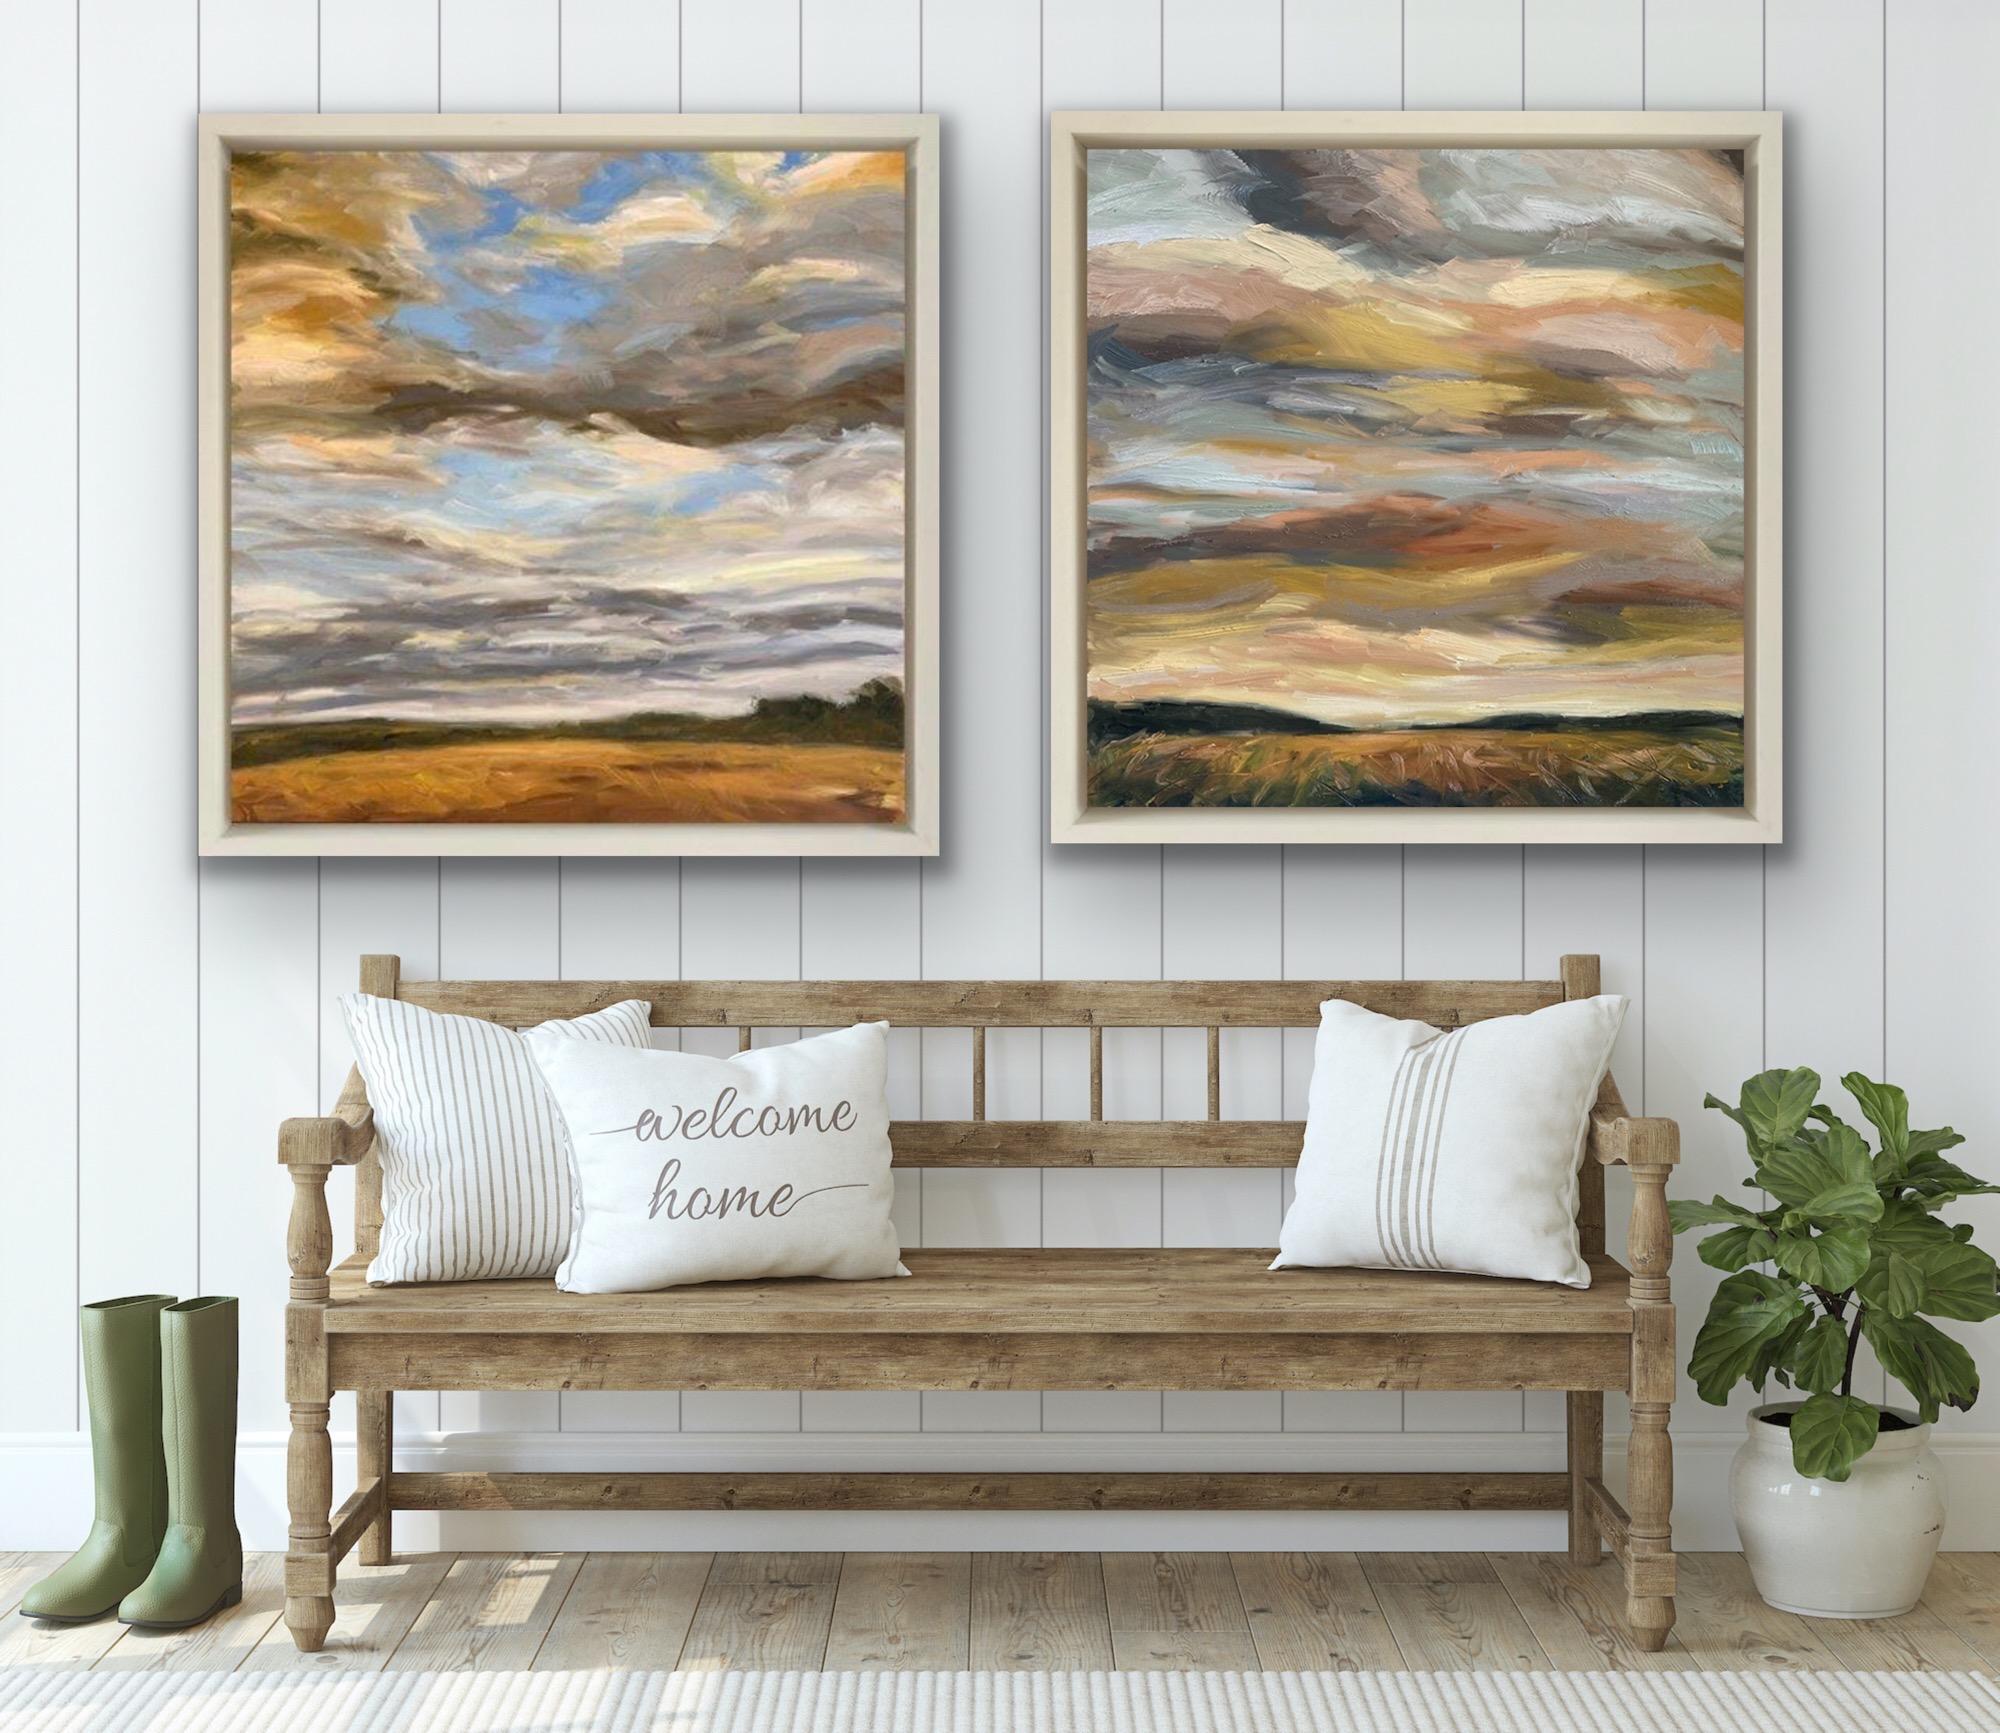 Suzanne Winn Landscape Painting - Diptych of Autumn skies V and Golden Days, Original painting, Landscape